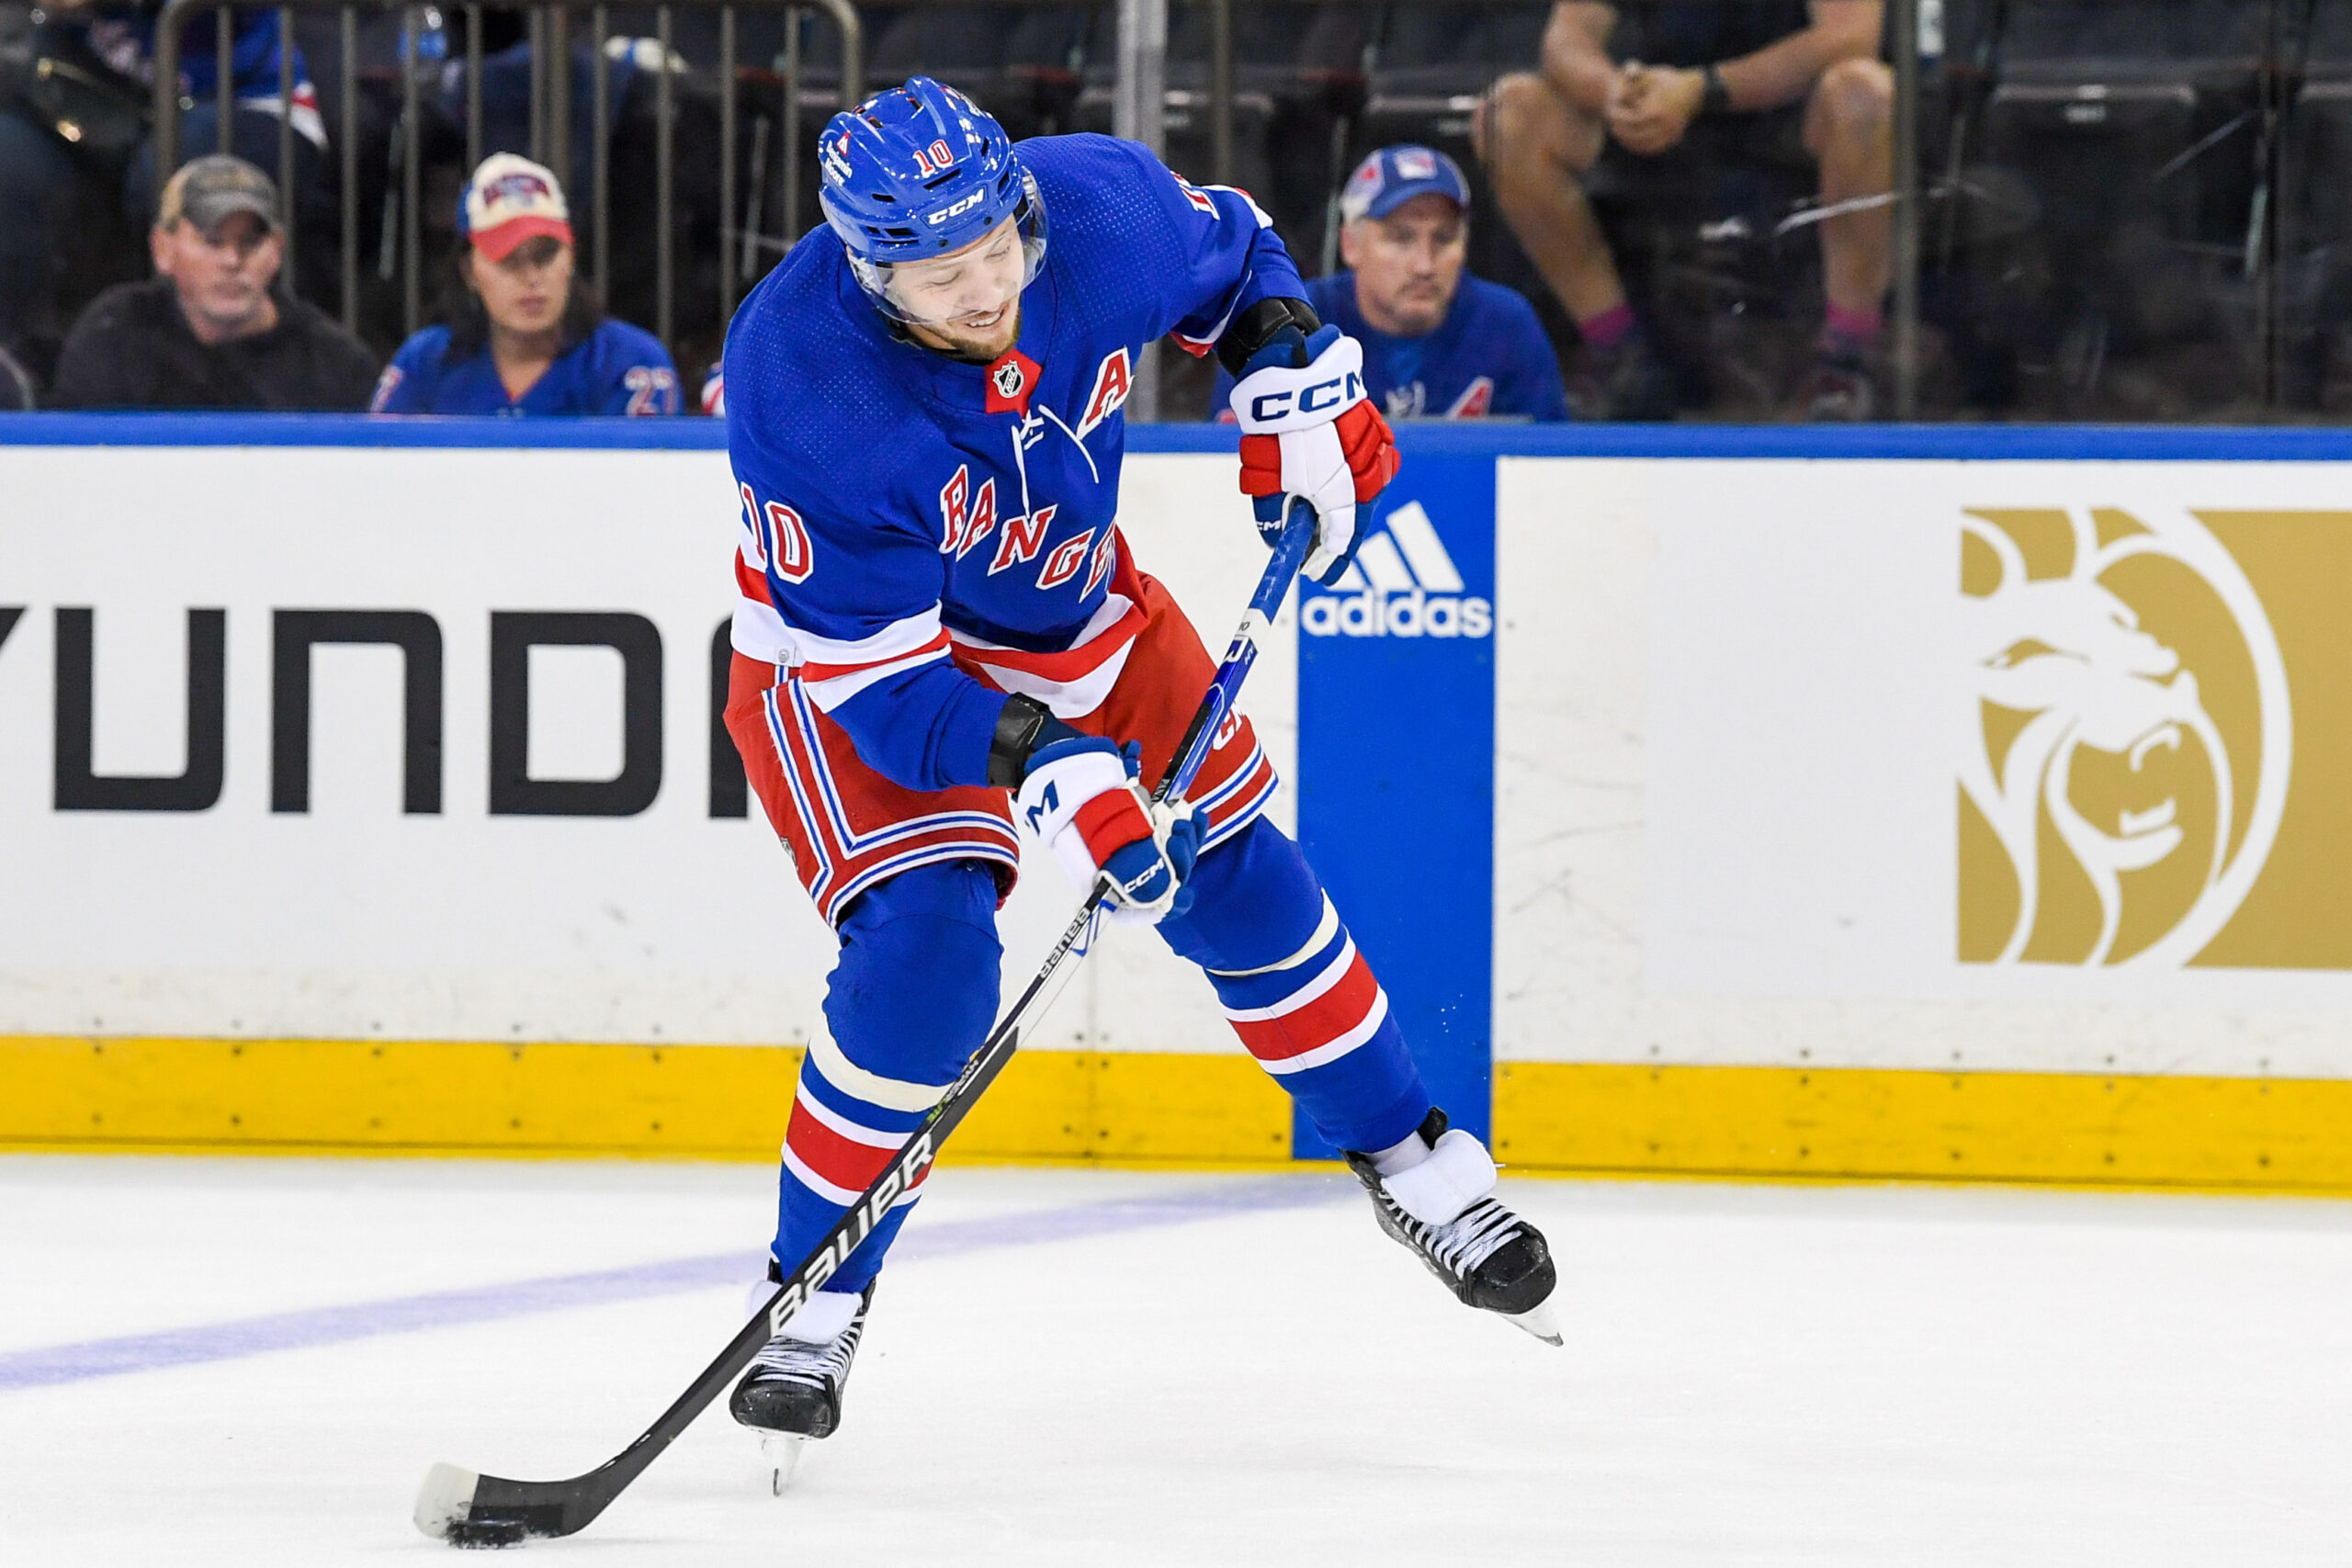 Panarin, for now, anchors talented offense